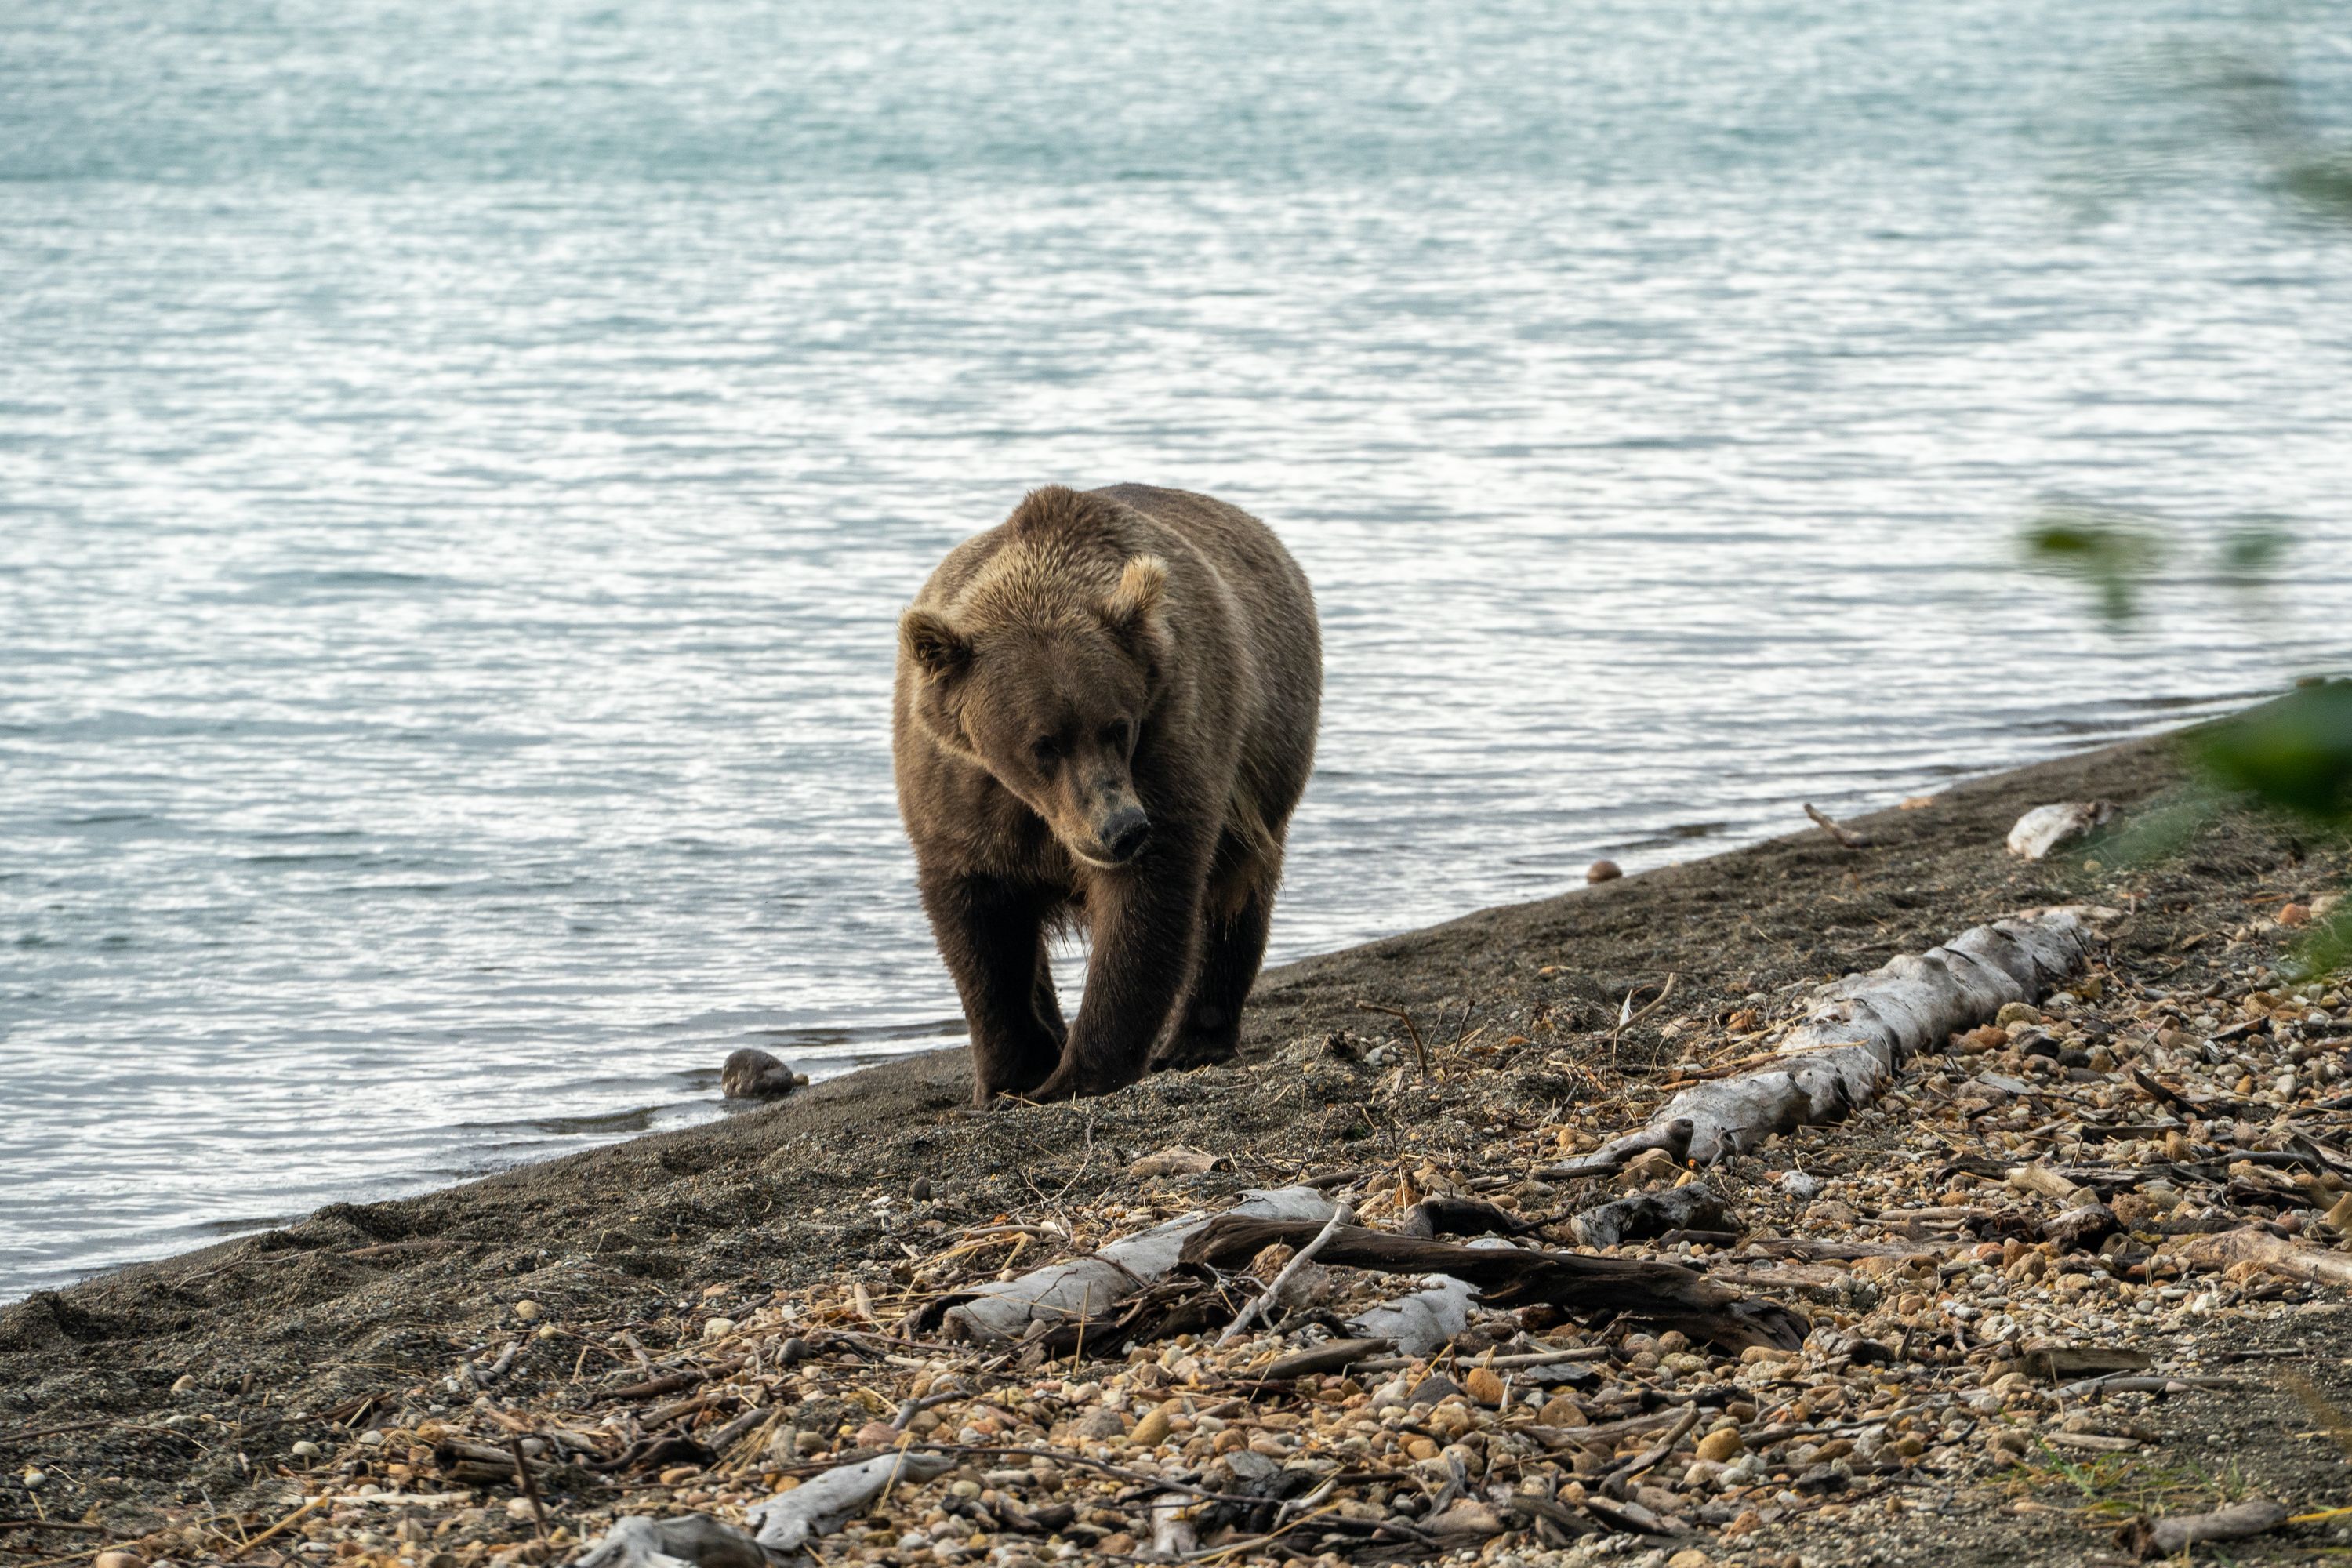 A large bear walking by the beach next our camp. Bears are surprisingly quiet animals.